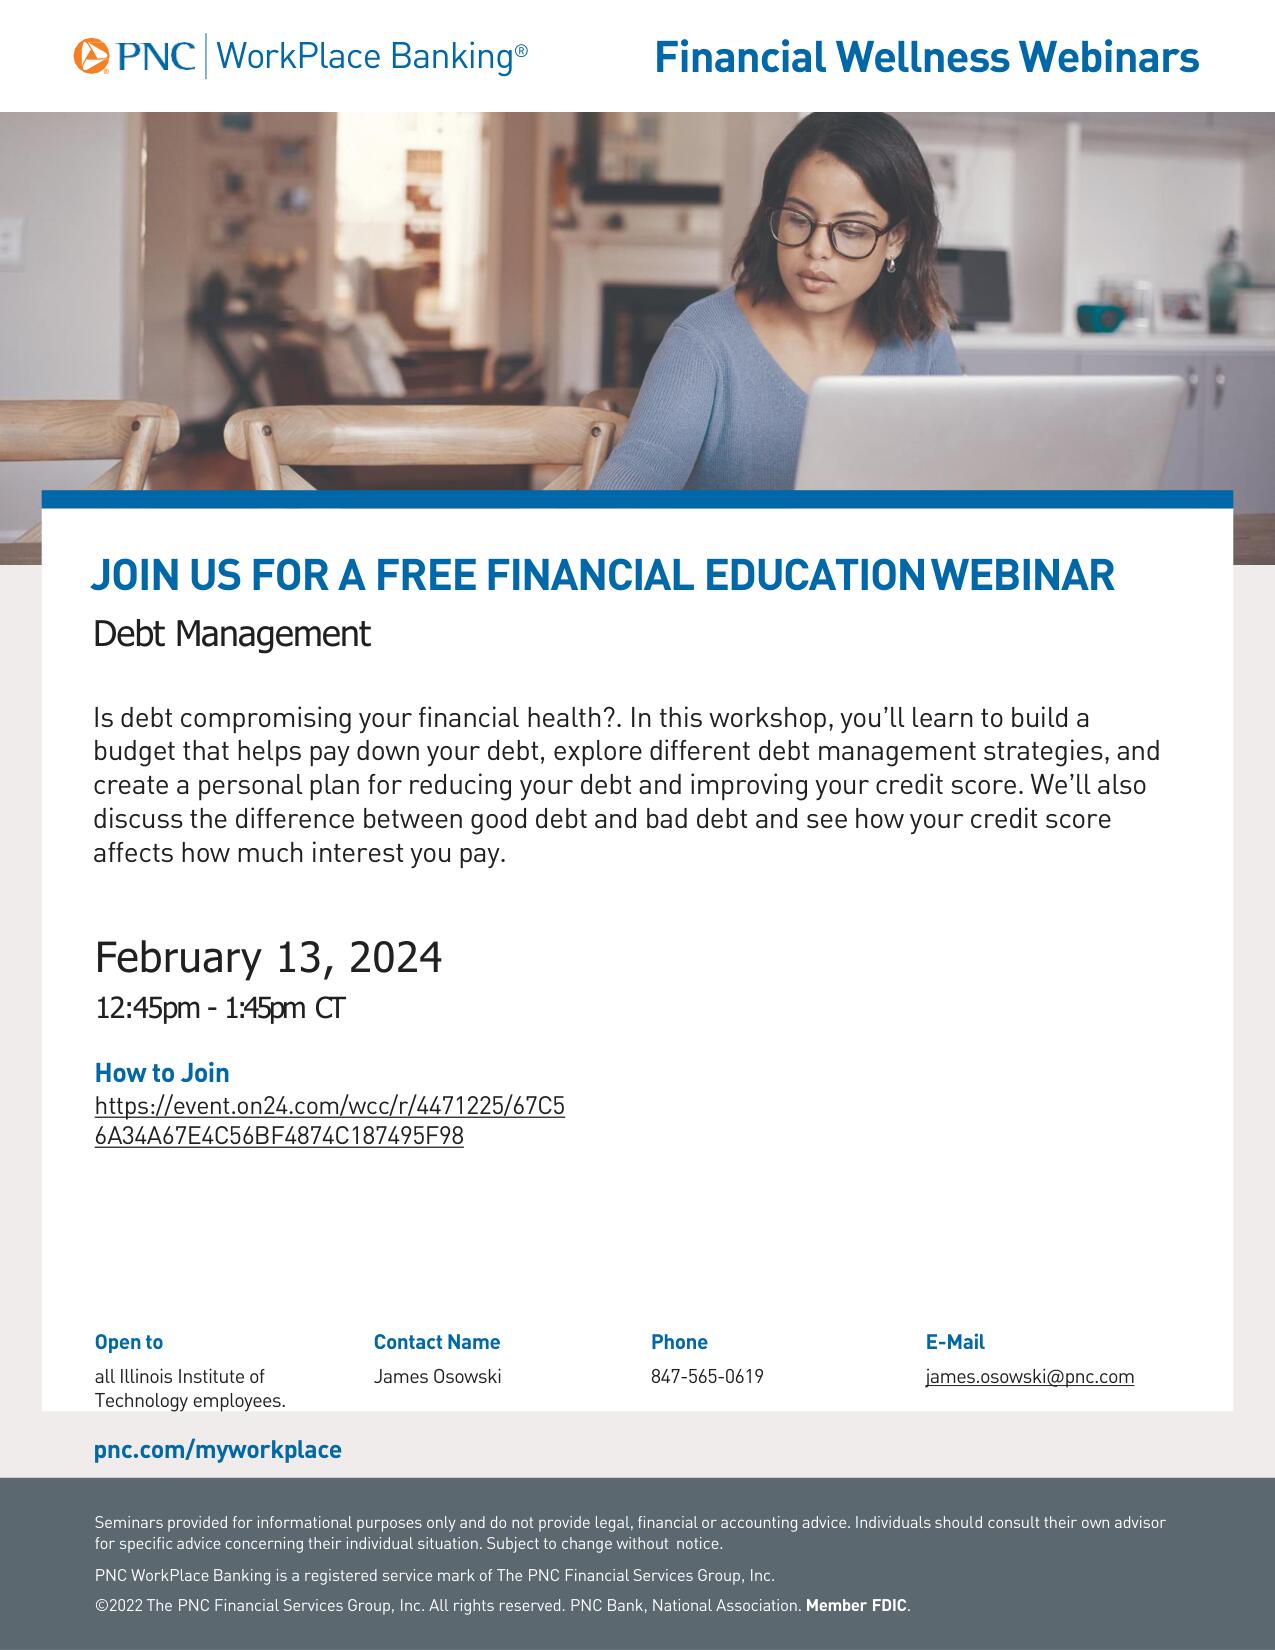 Flyer reads: Join us for a free financial education webinar. Debt management. Is debt compromising your financial health? In this workshop, you'll learn to build a budget that helps pay down your debt, explore different debt management strategies, and create a personal plan for reducing your debt and improving your credit score. We'll also discuss the difference between good debt and bad debt and see how your credit score affects how much interest you pay.